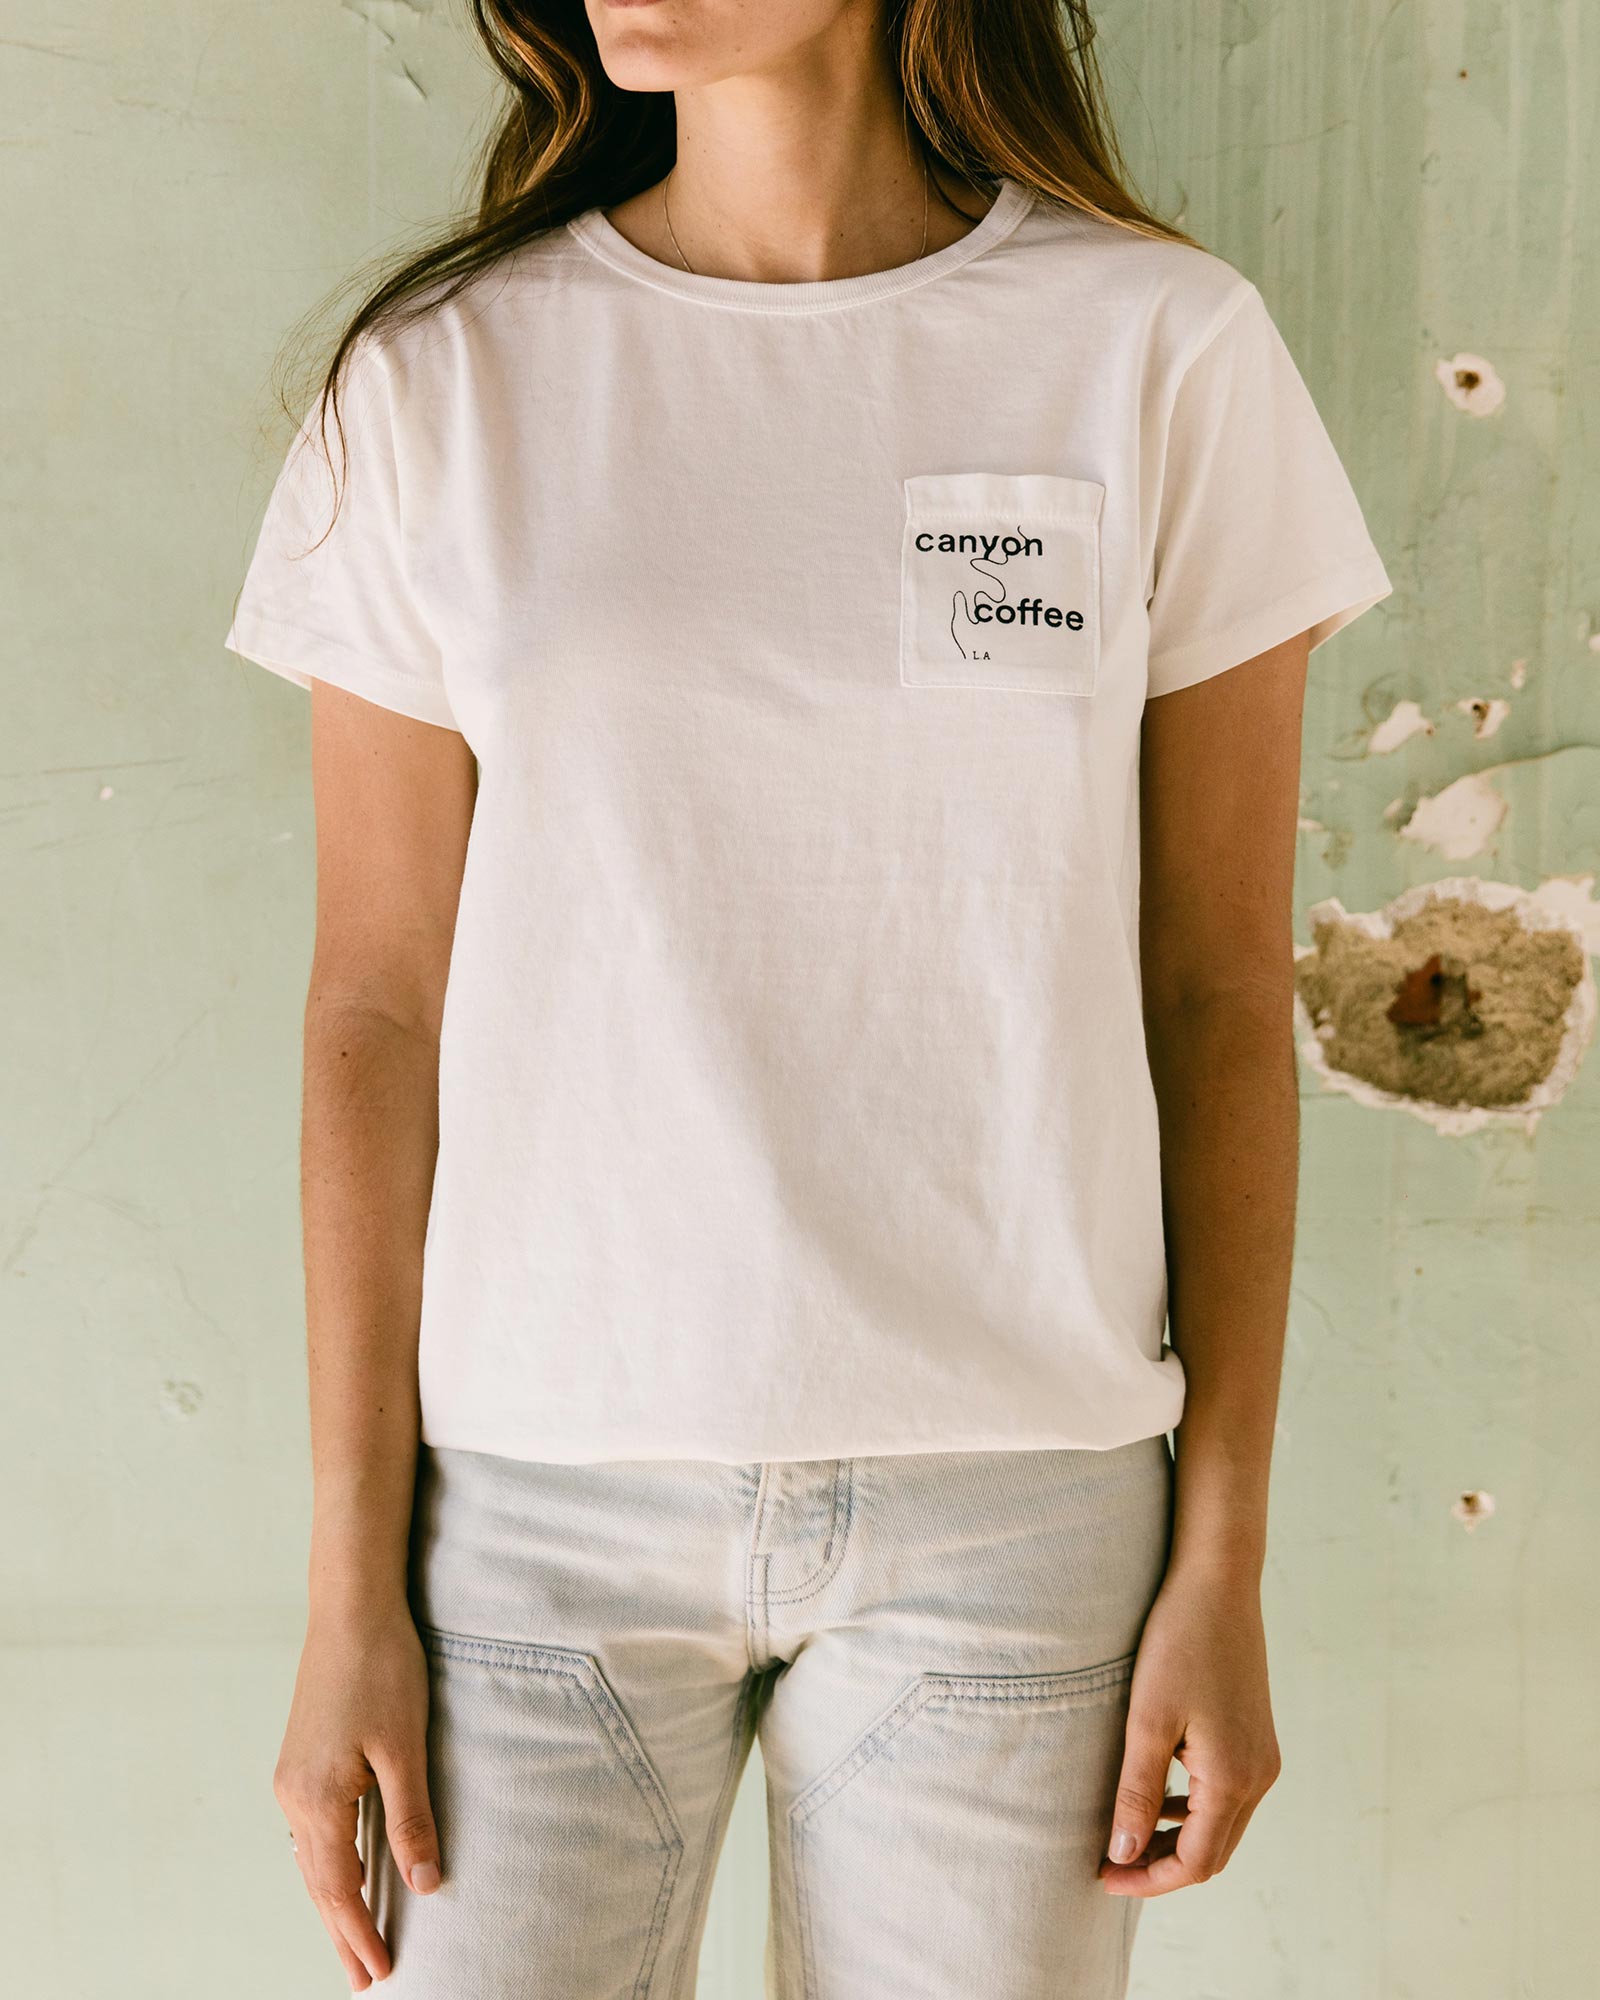 The Canyon Coffee white cotton pocket tee, made in Los Angeles